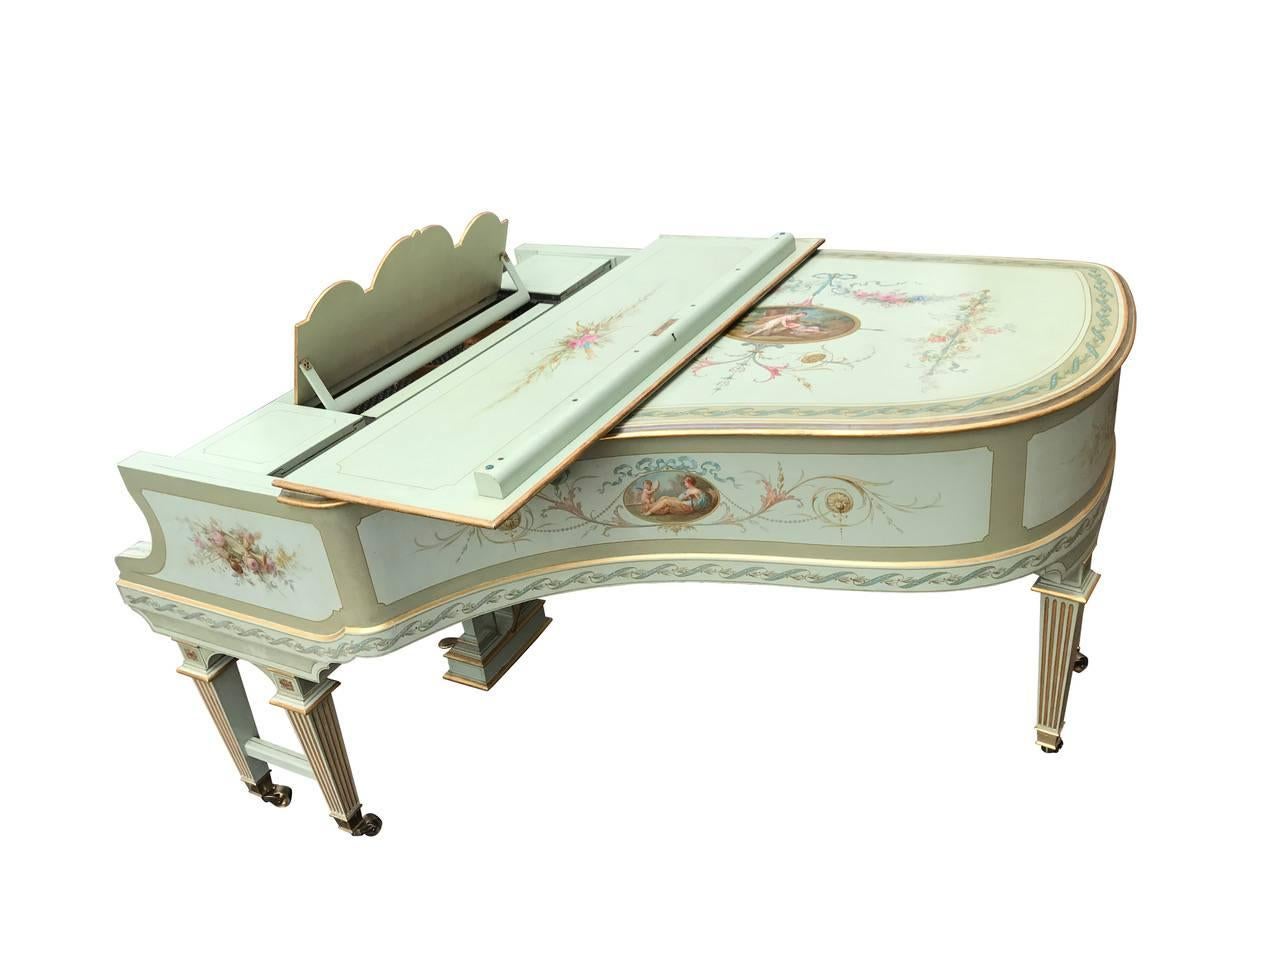 Neoclassical Revival 20th Century German Bluthner Grand Art Cased Piano Style Antoine Watteau For Sale